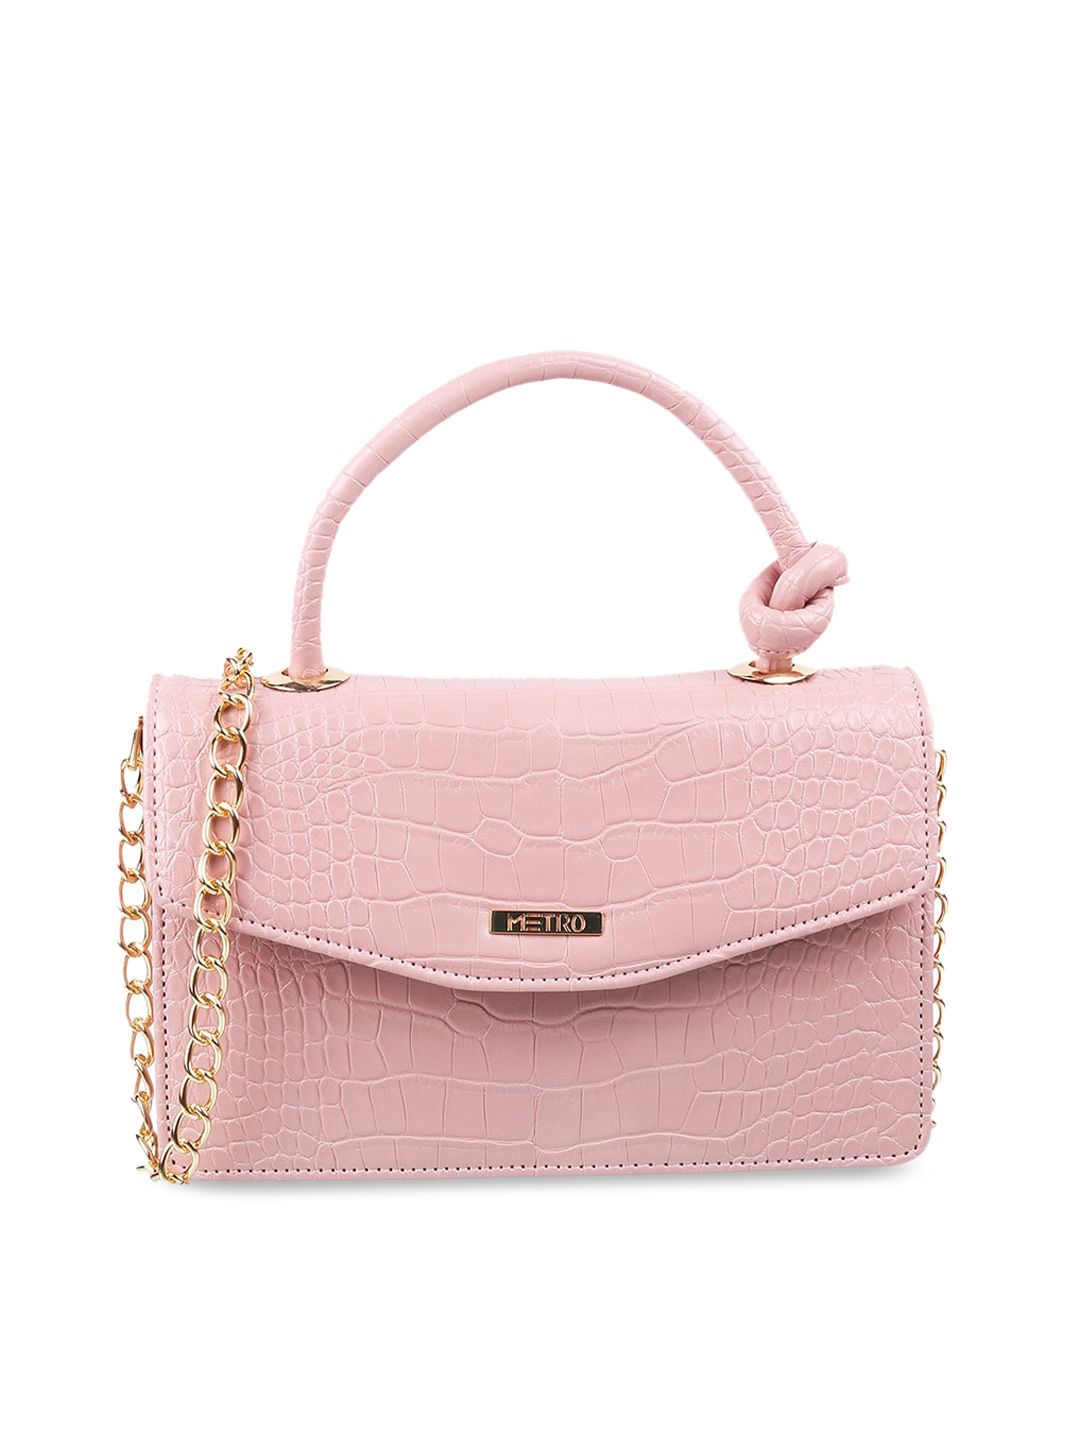 Metro Peach-Coloured Textured PU Structured Sling Bag Price in India